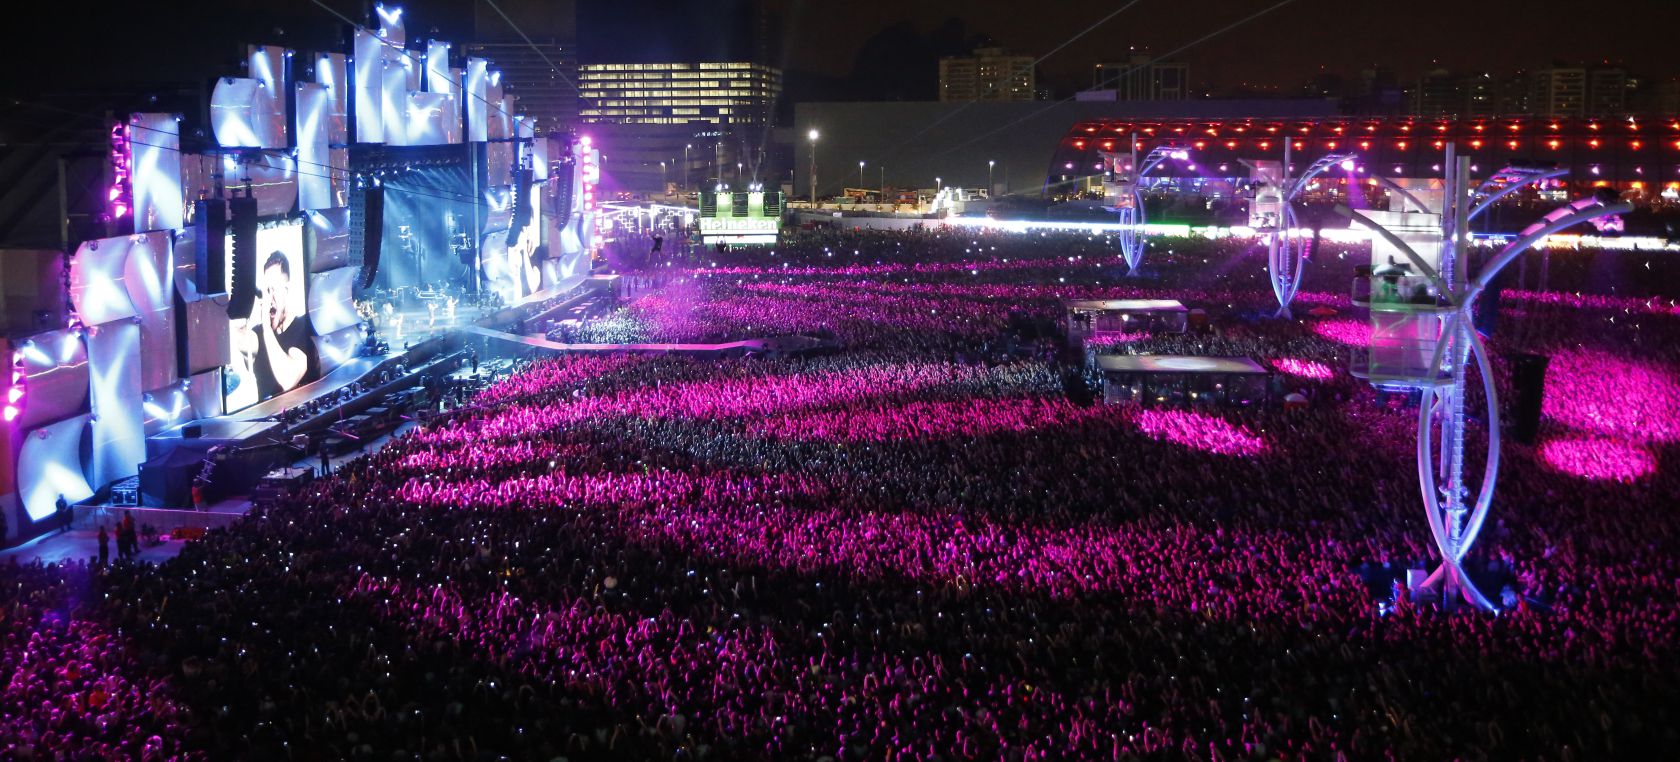 Rock in Rio sold out all the tickets for six of the seven days of the event in just five hours (with tickets costing R$625 per day).